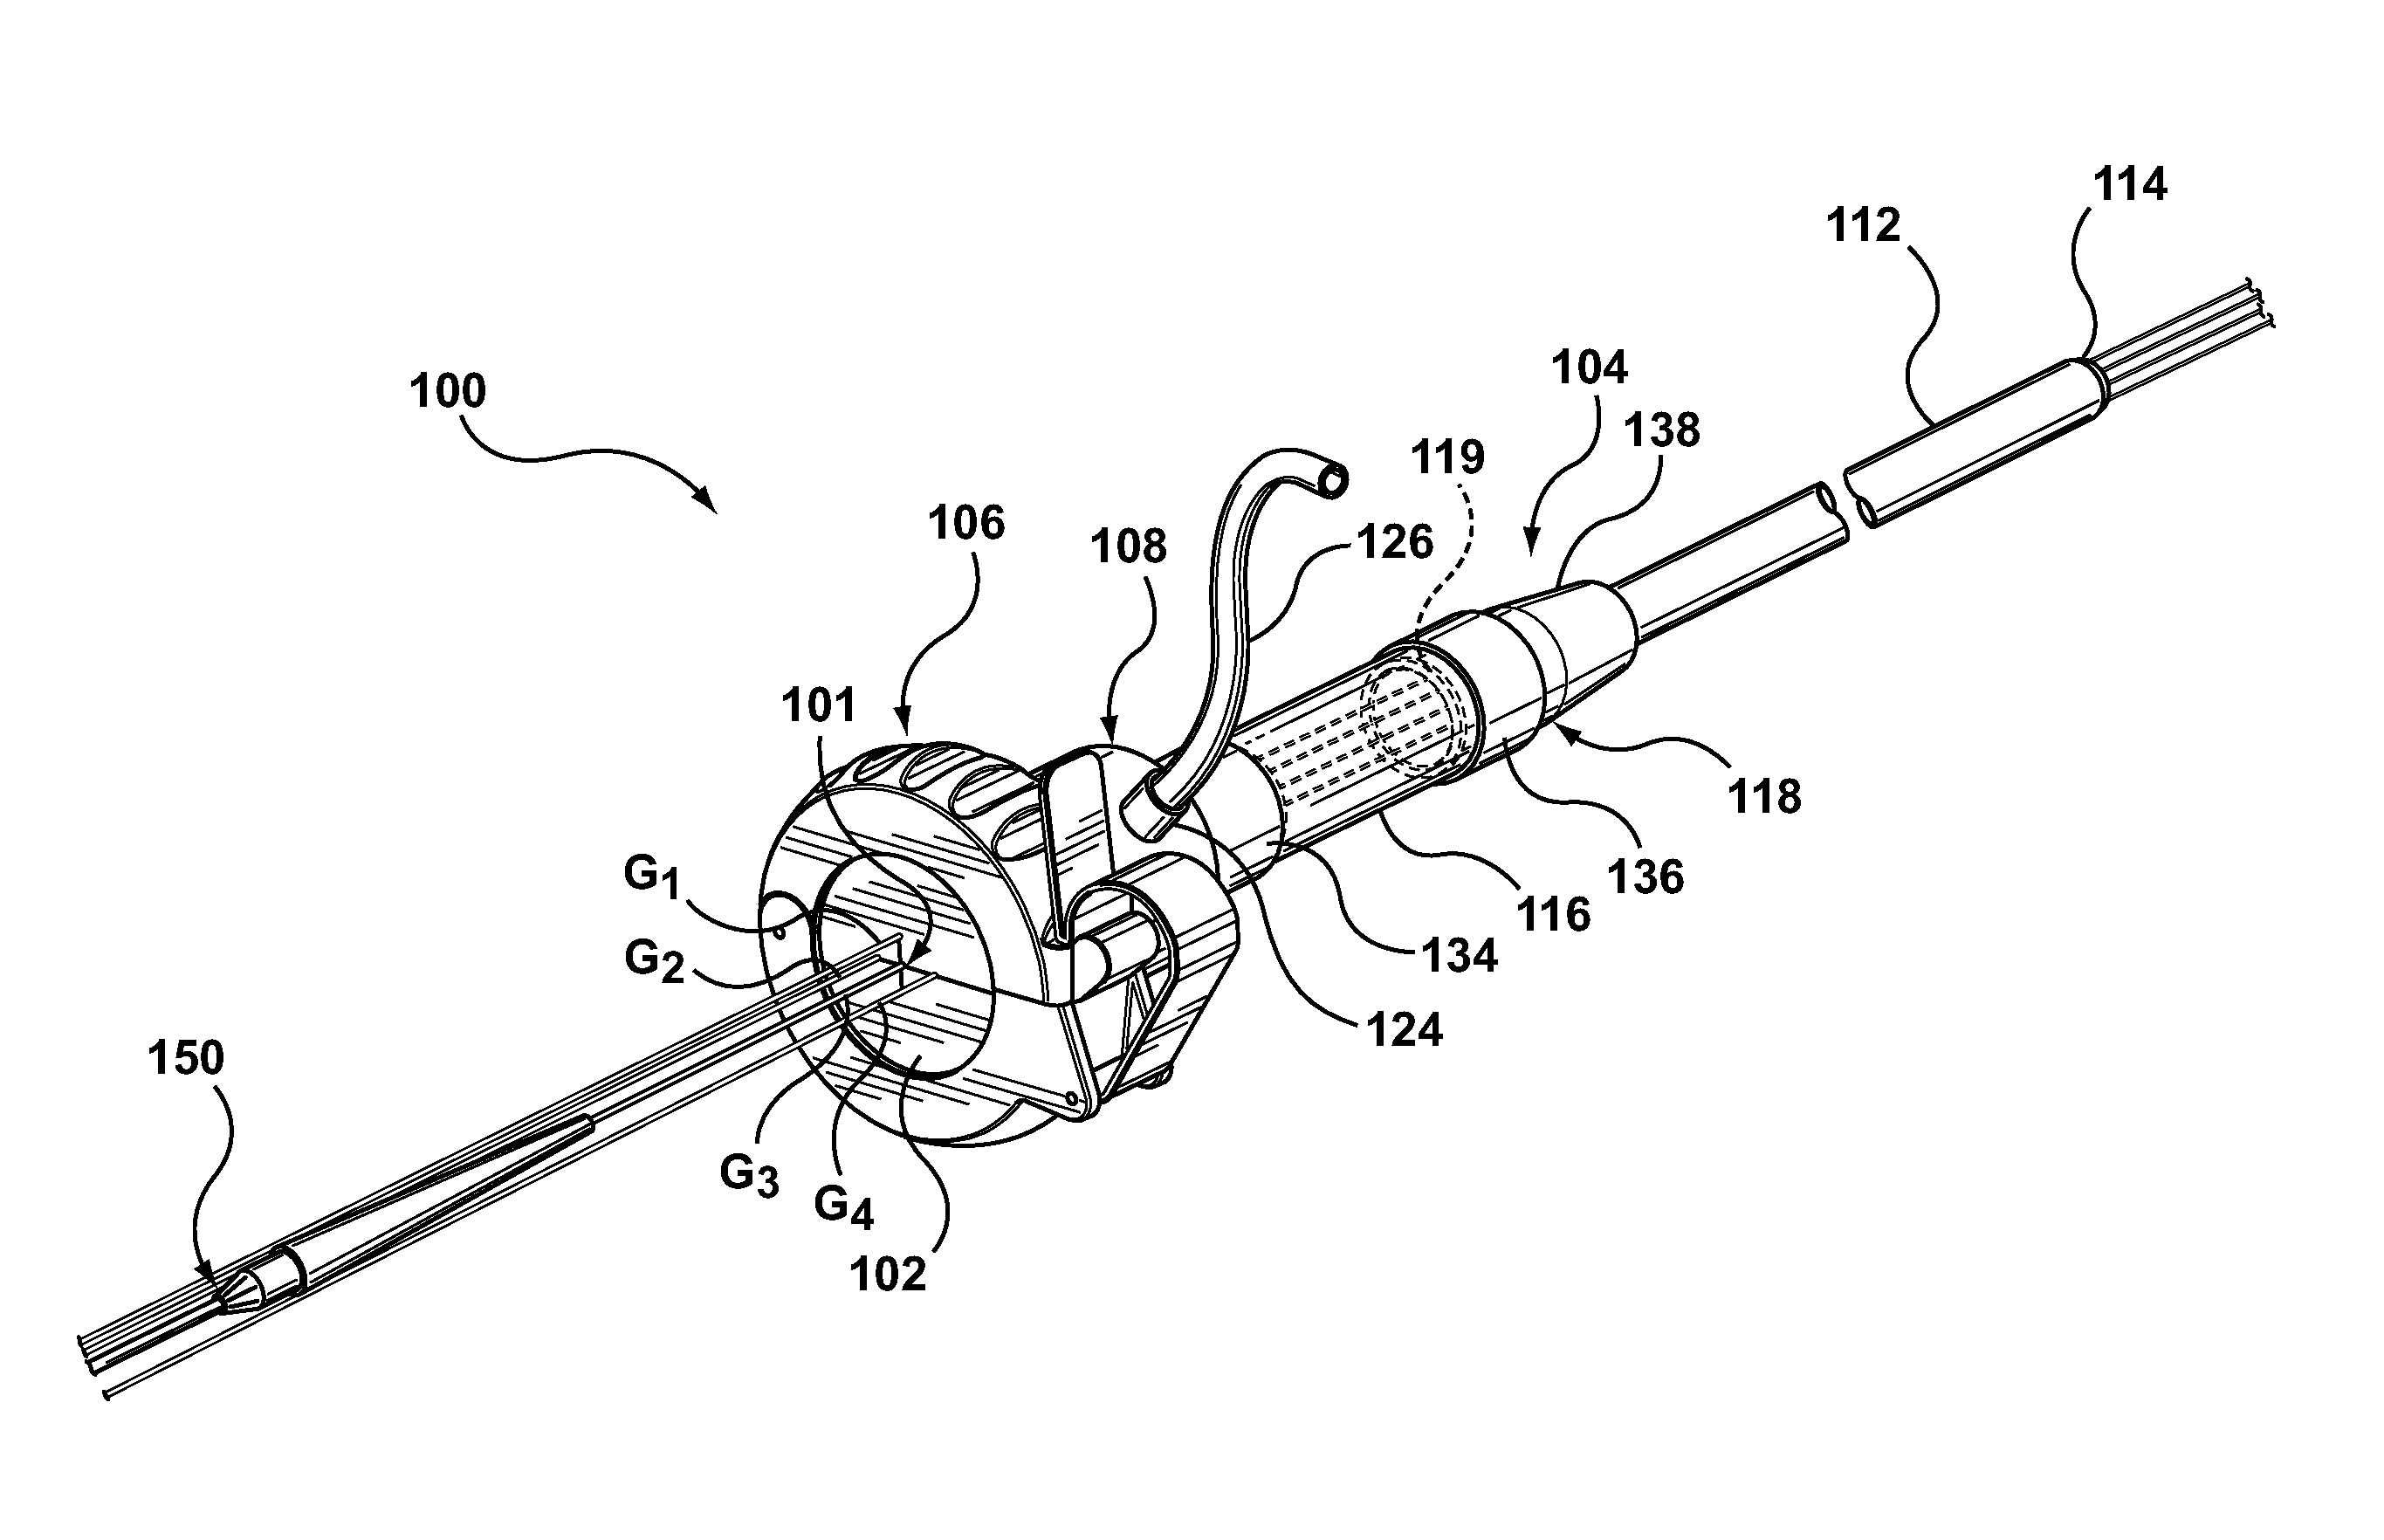 Sheath Introducer System with Exchangeable Hemostatic Valves